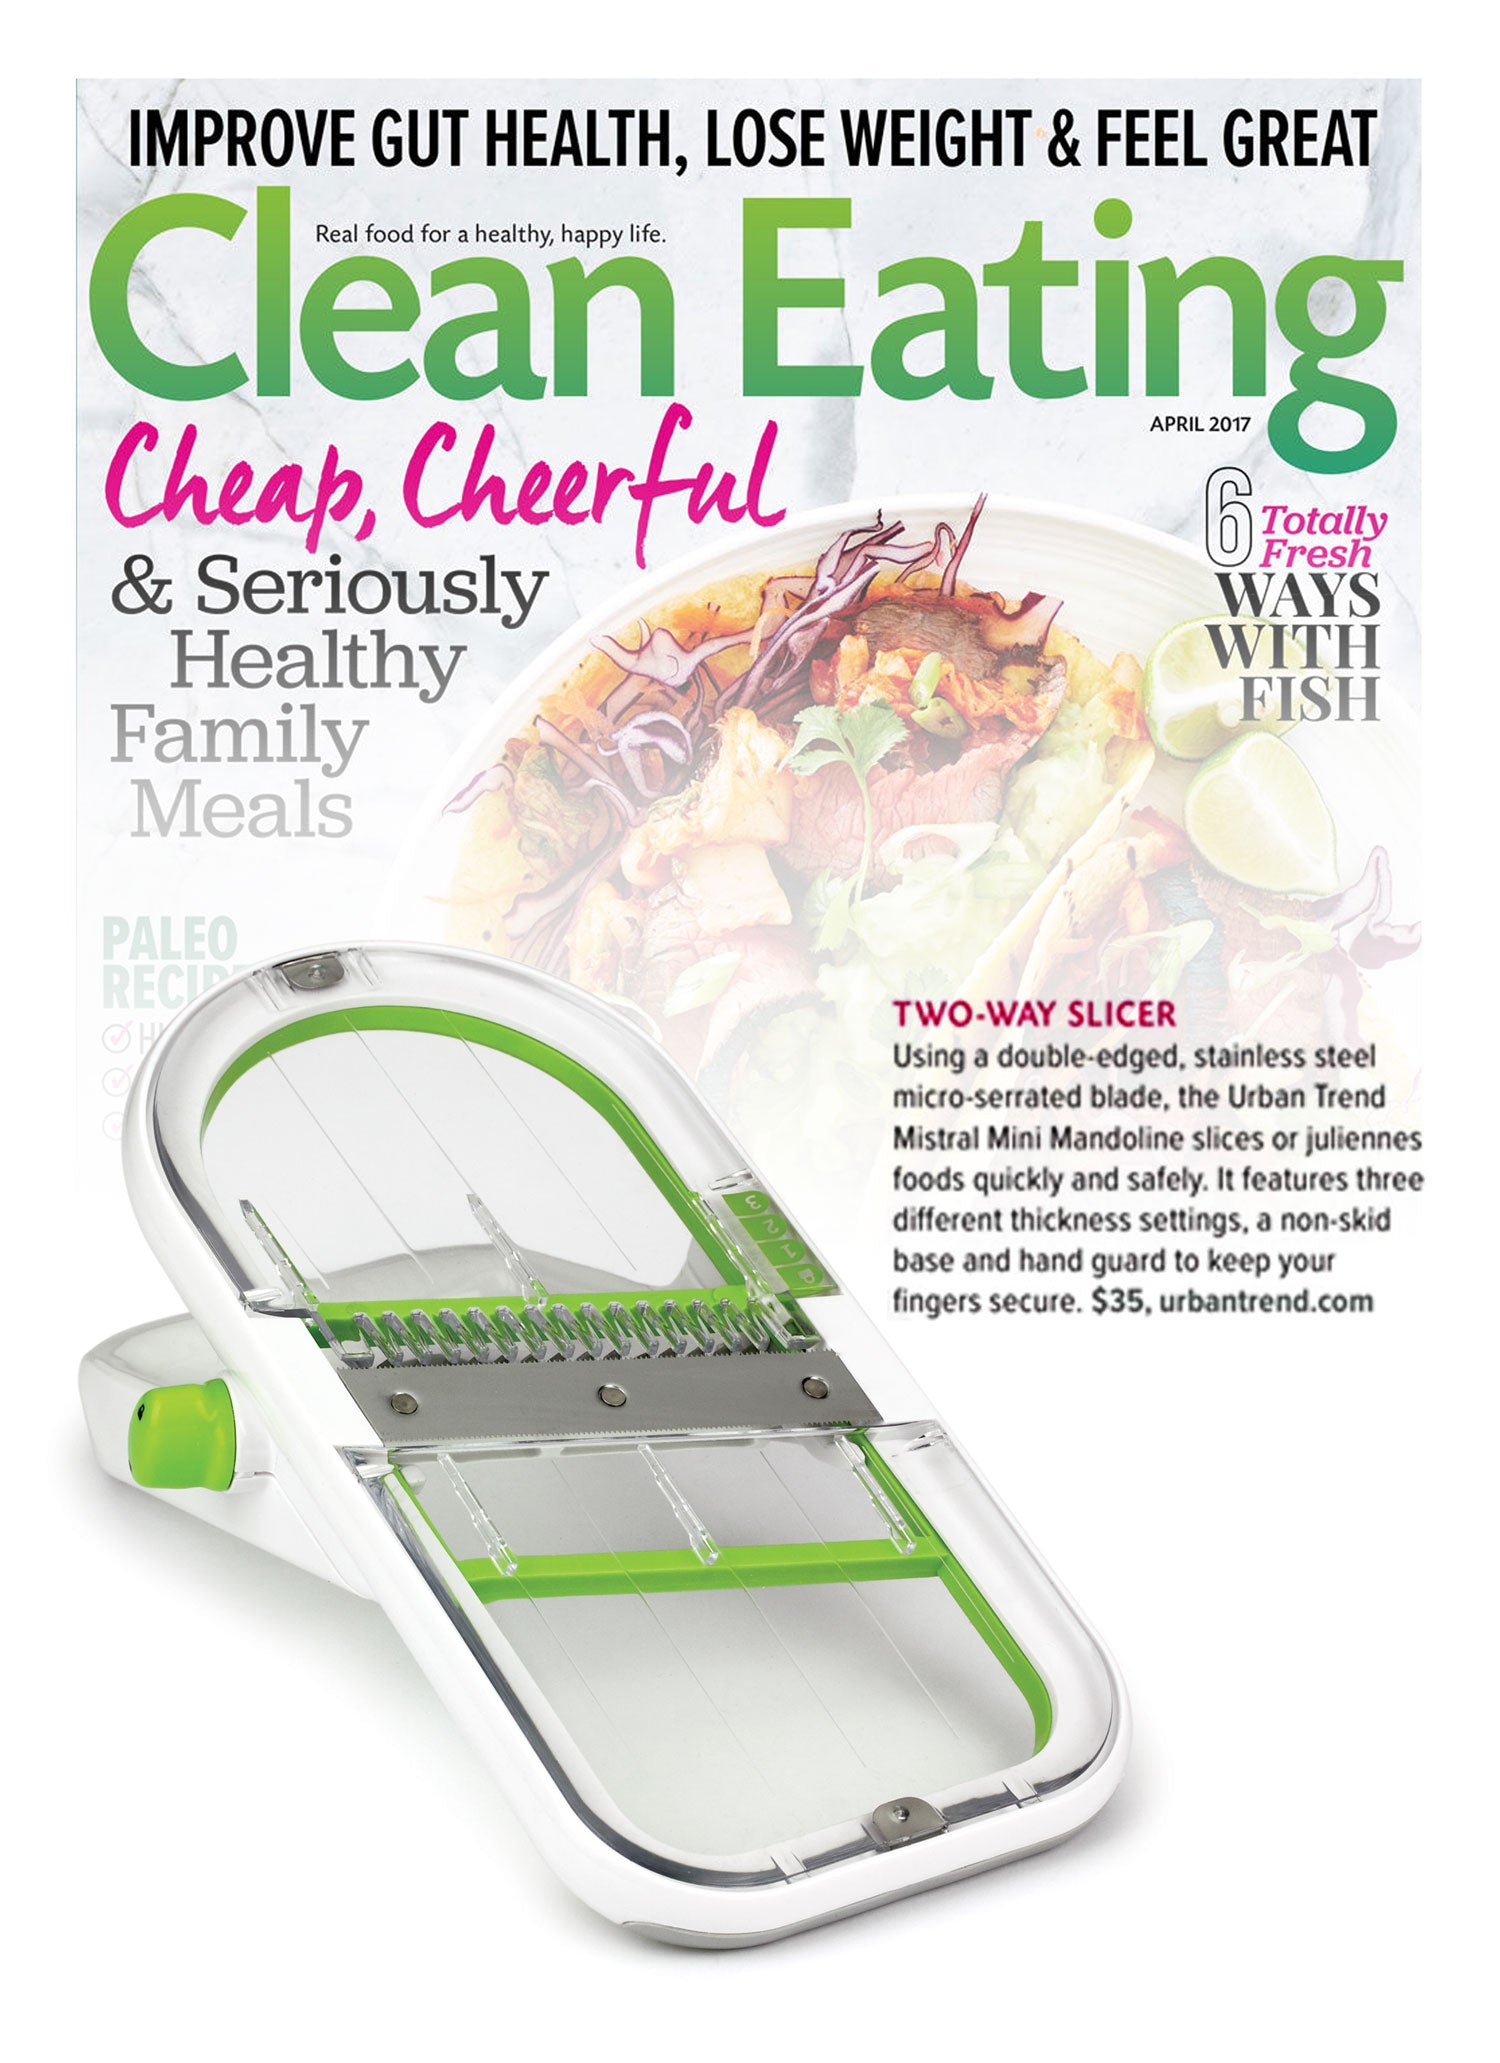 Clean Eating - Two way slicer